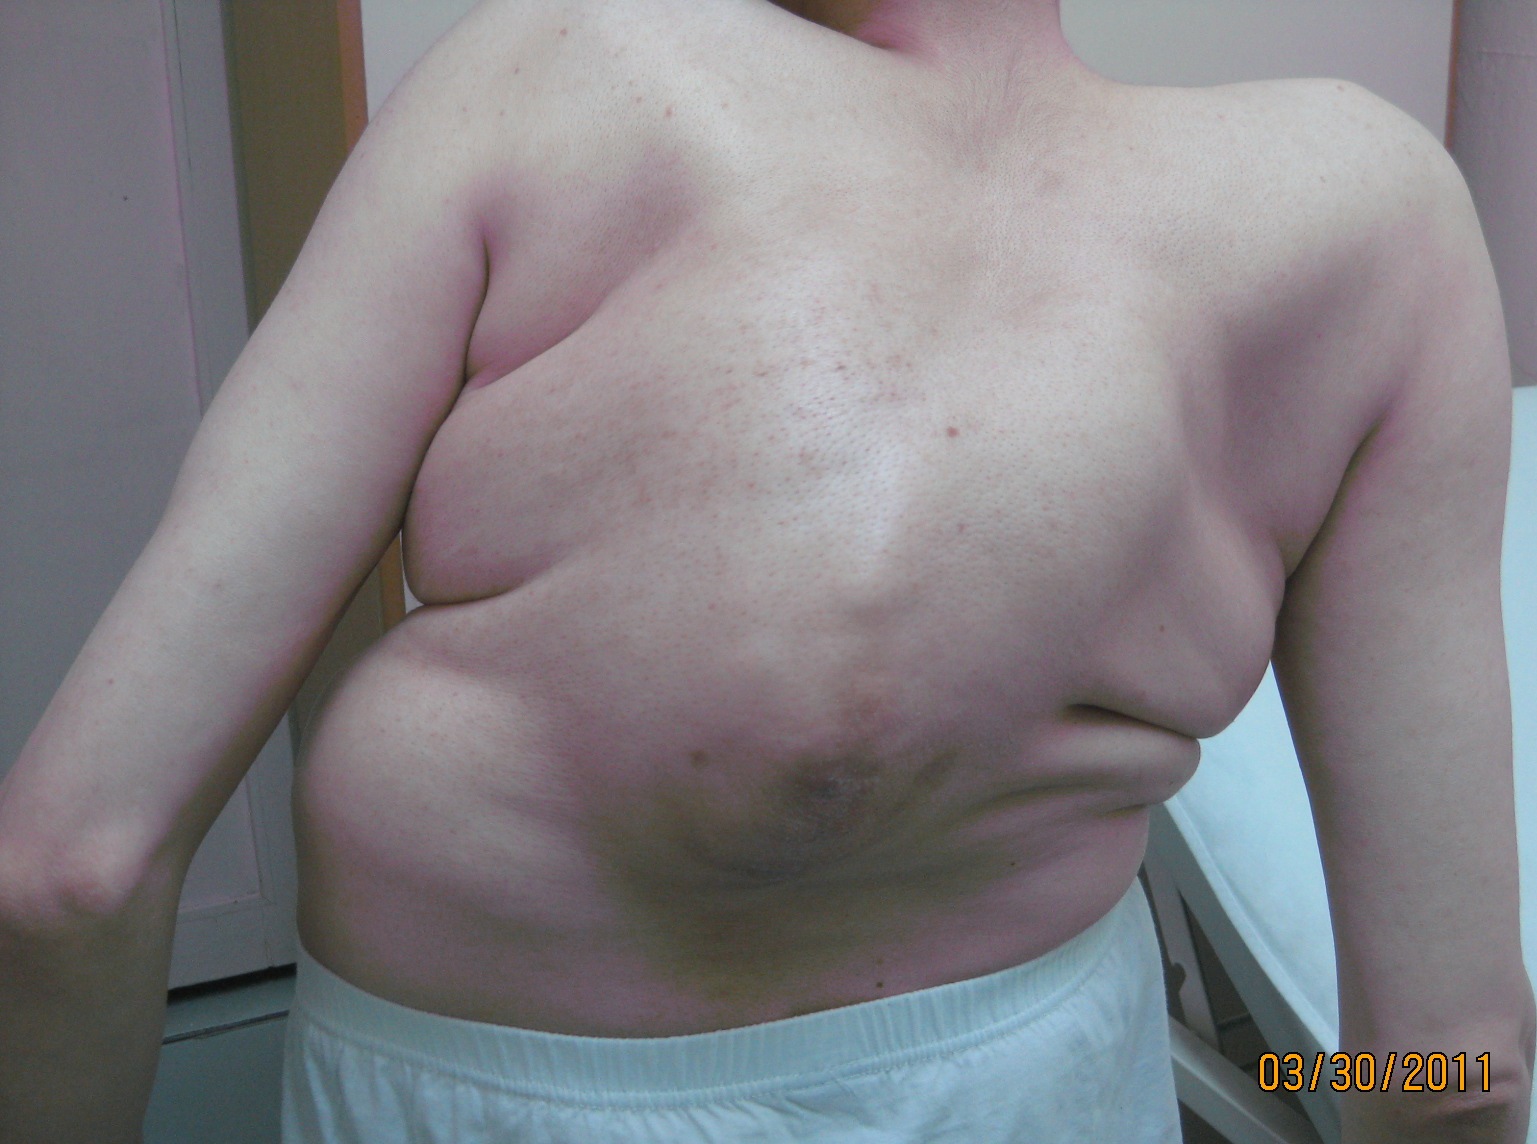 A 53 years old patient with severe kyphosis